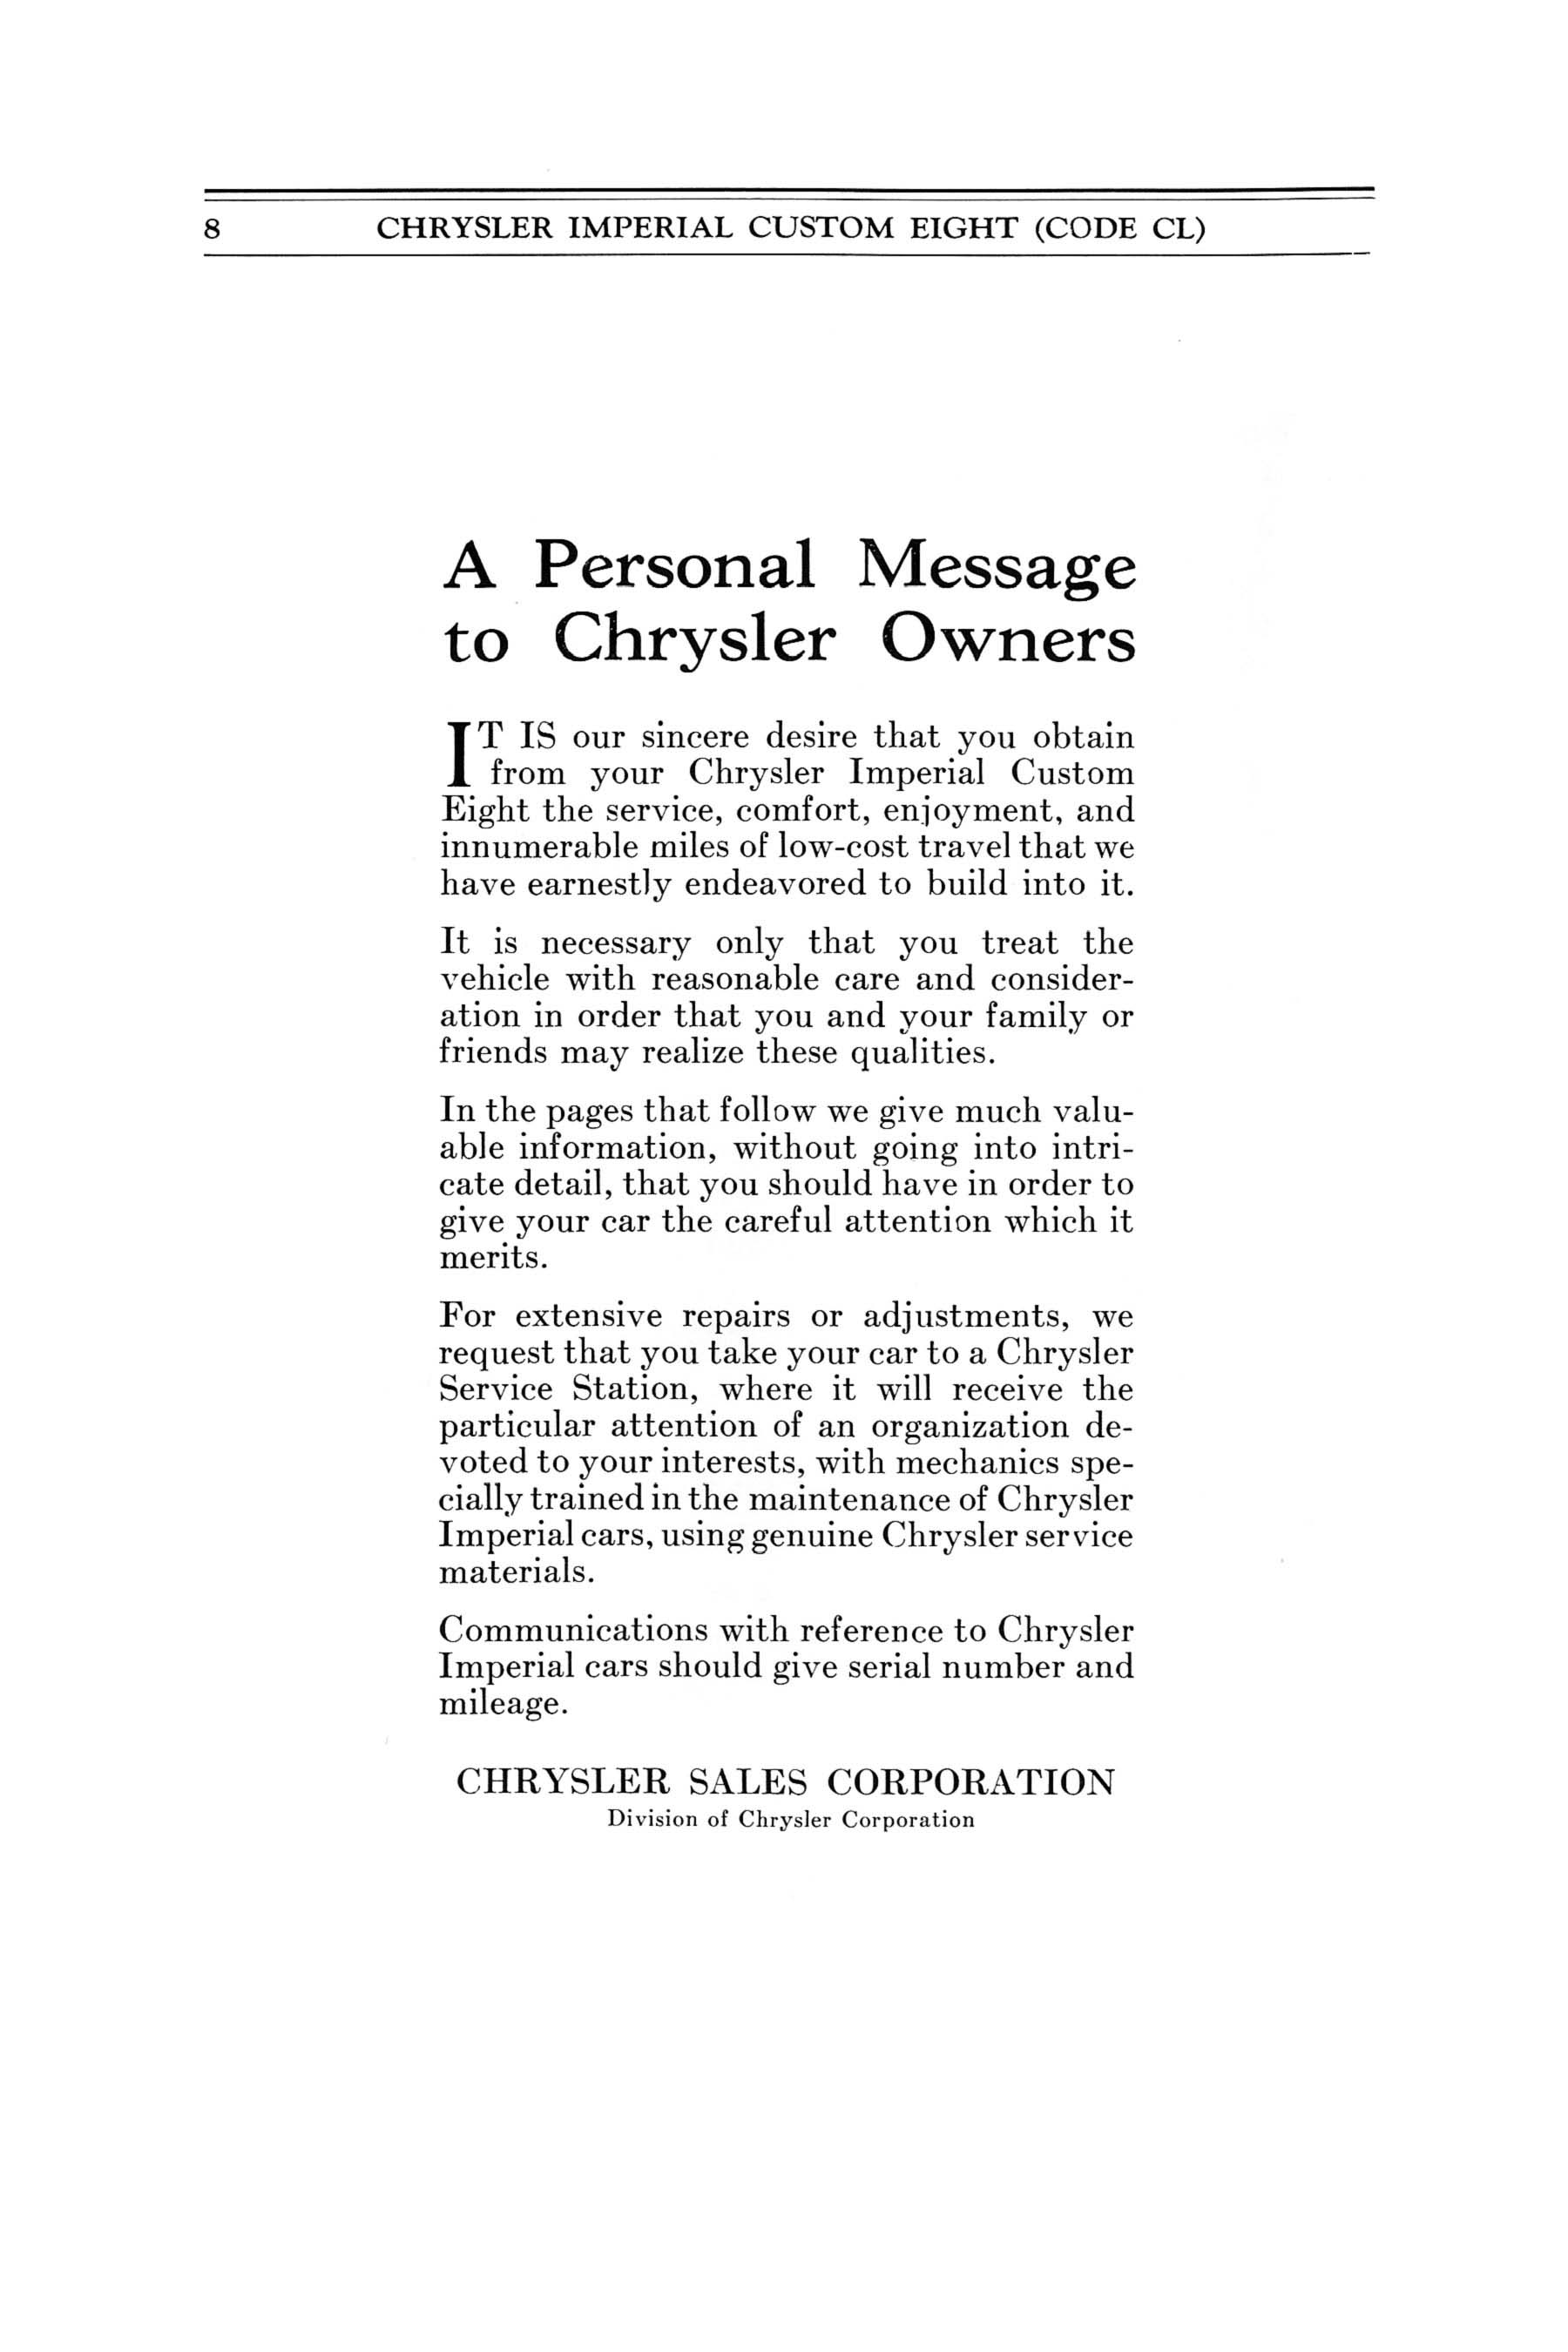 1932 Chrysler Imperial Instruction Book Page 38